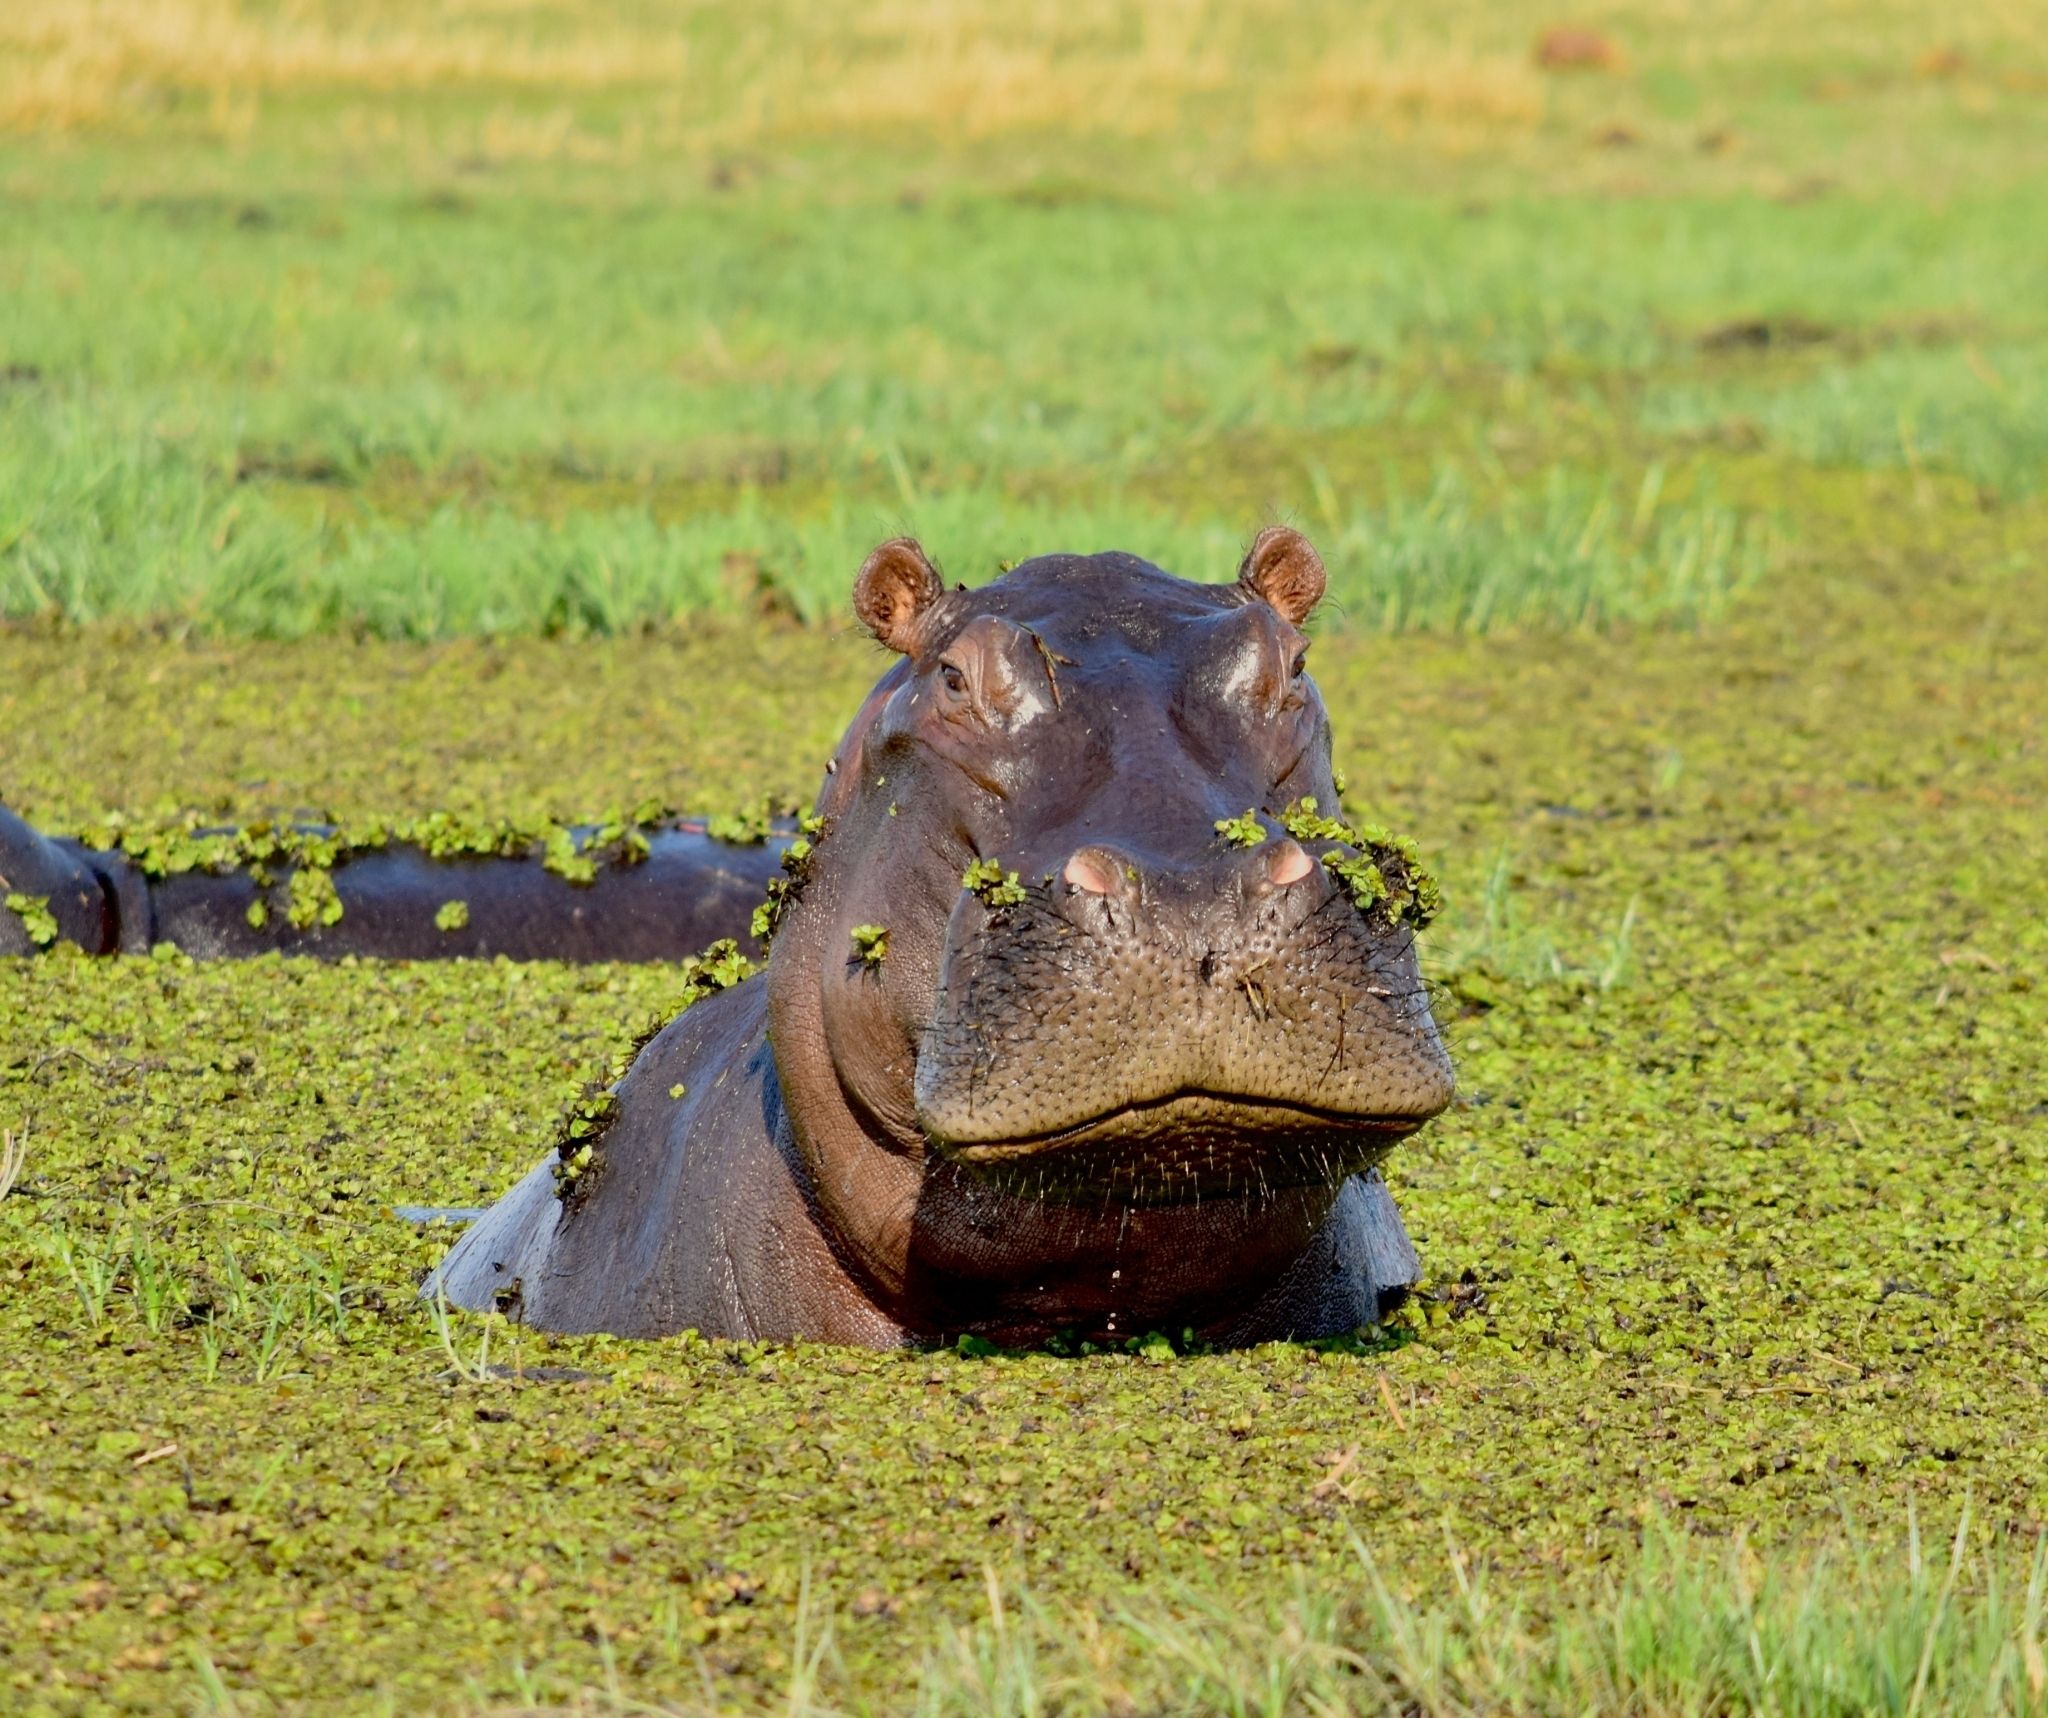 Hippo submerged in water and surrounded by water plants